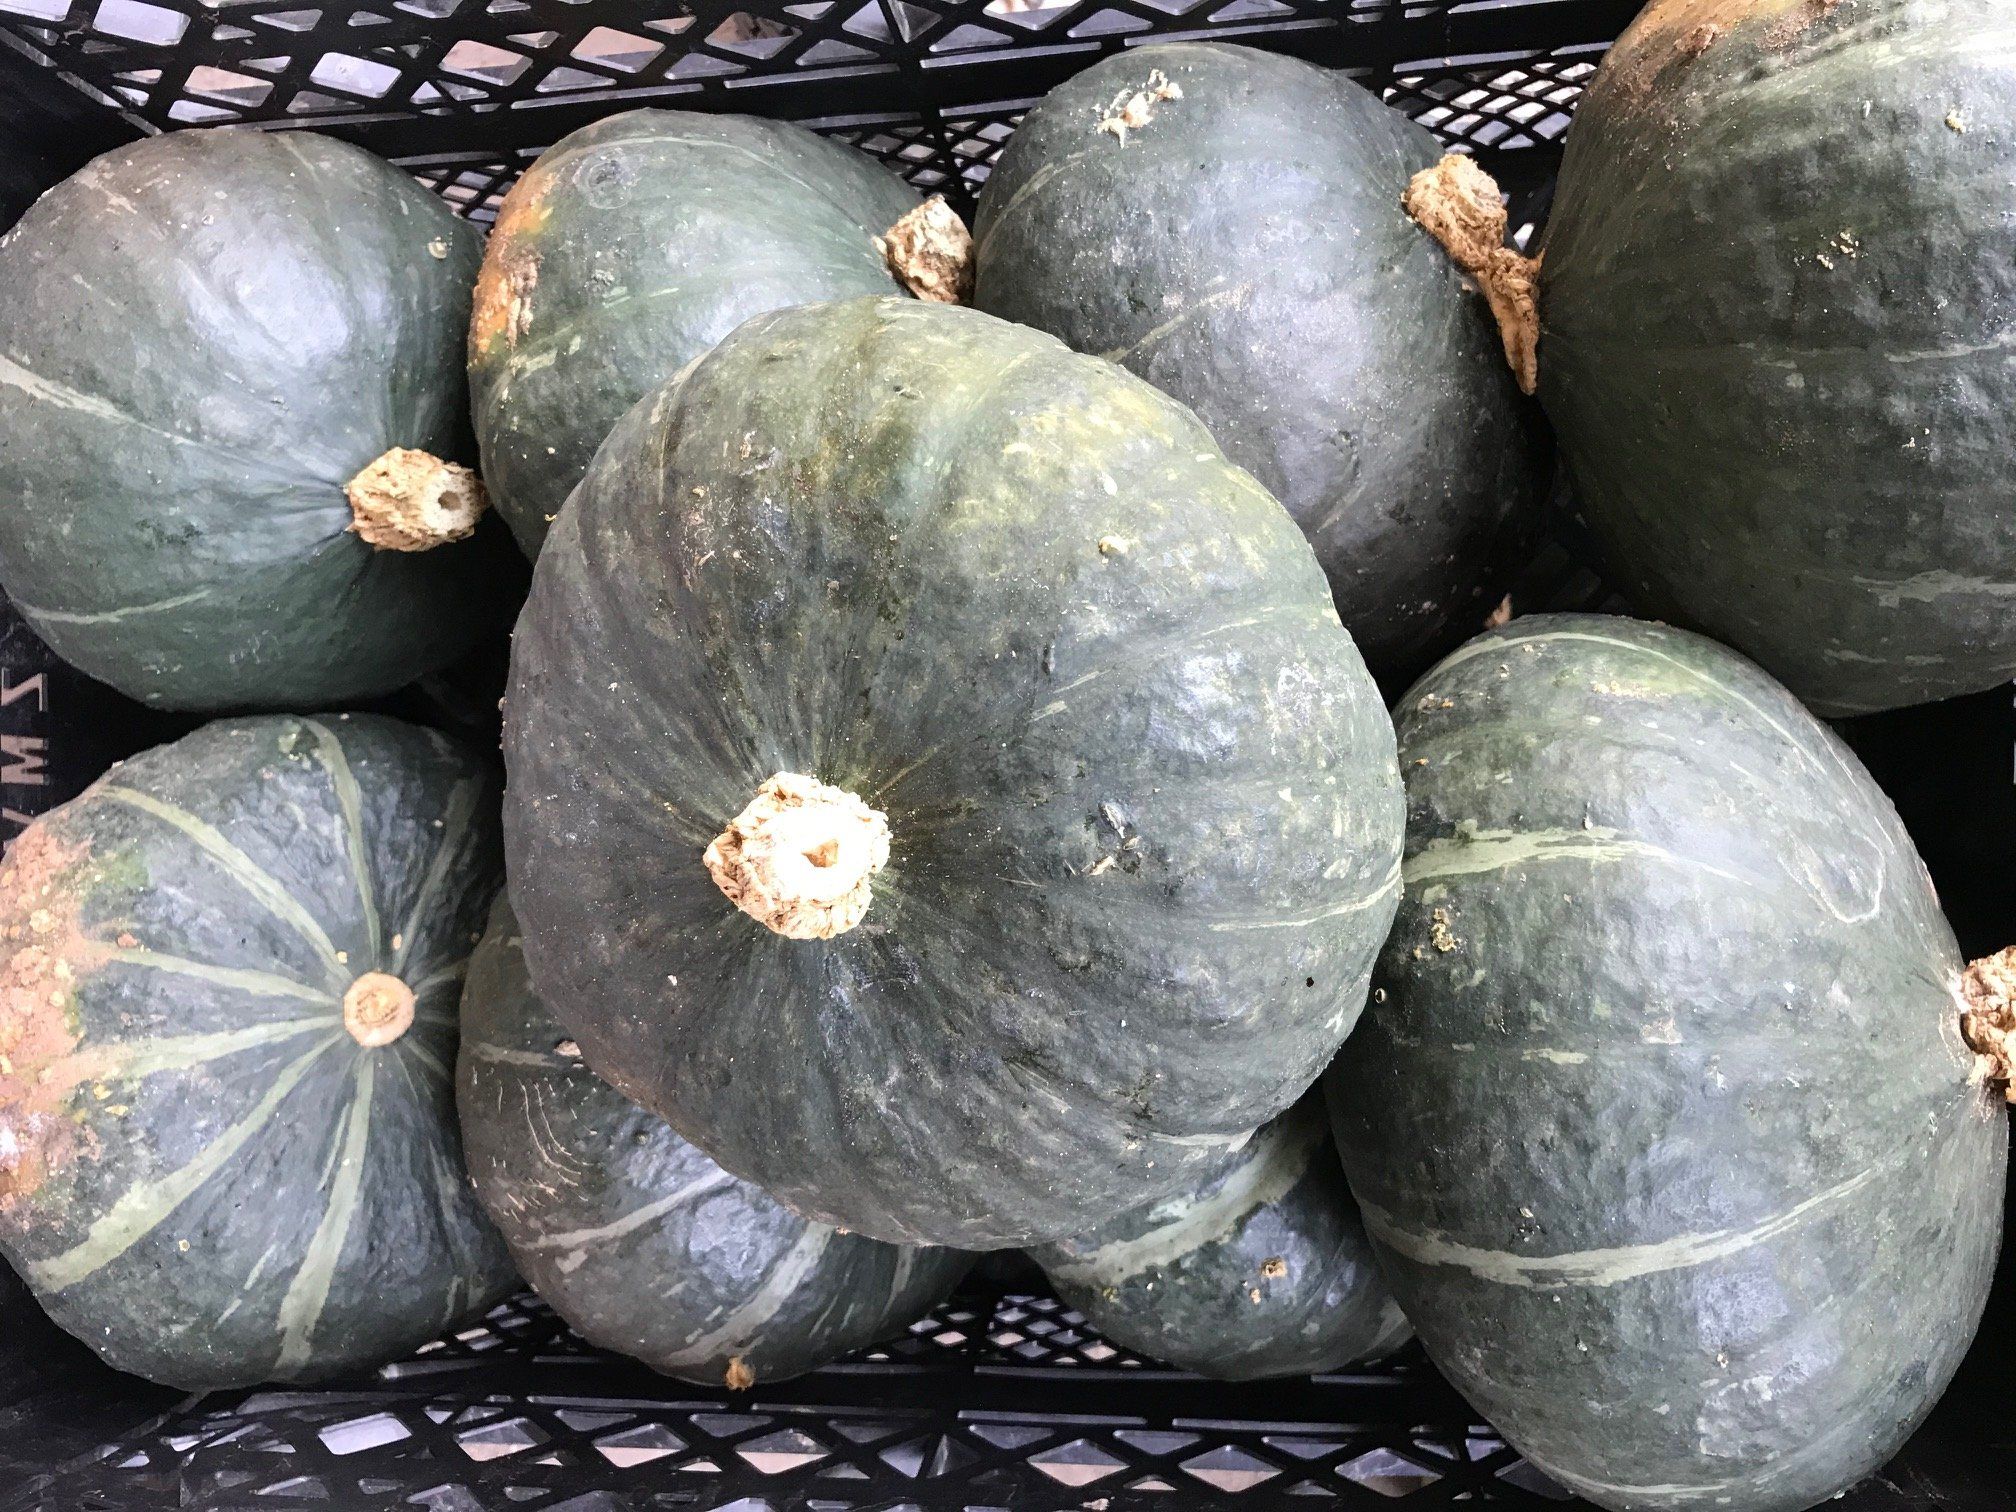 Next Happening: Farm Happenings for October 2nd, 2020